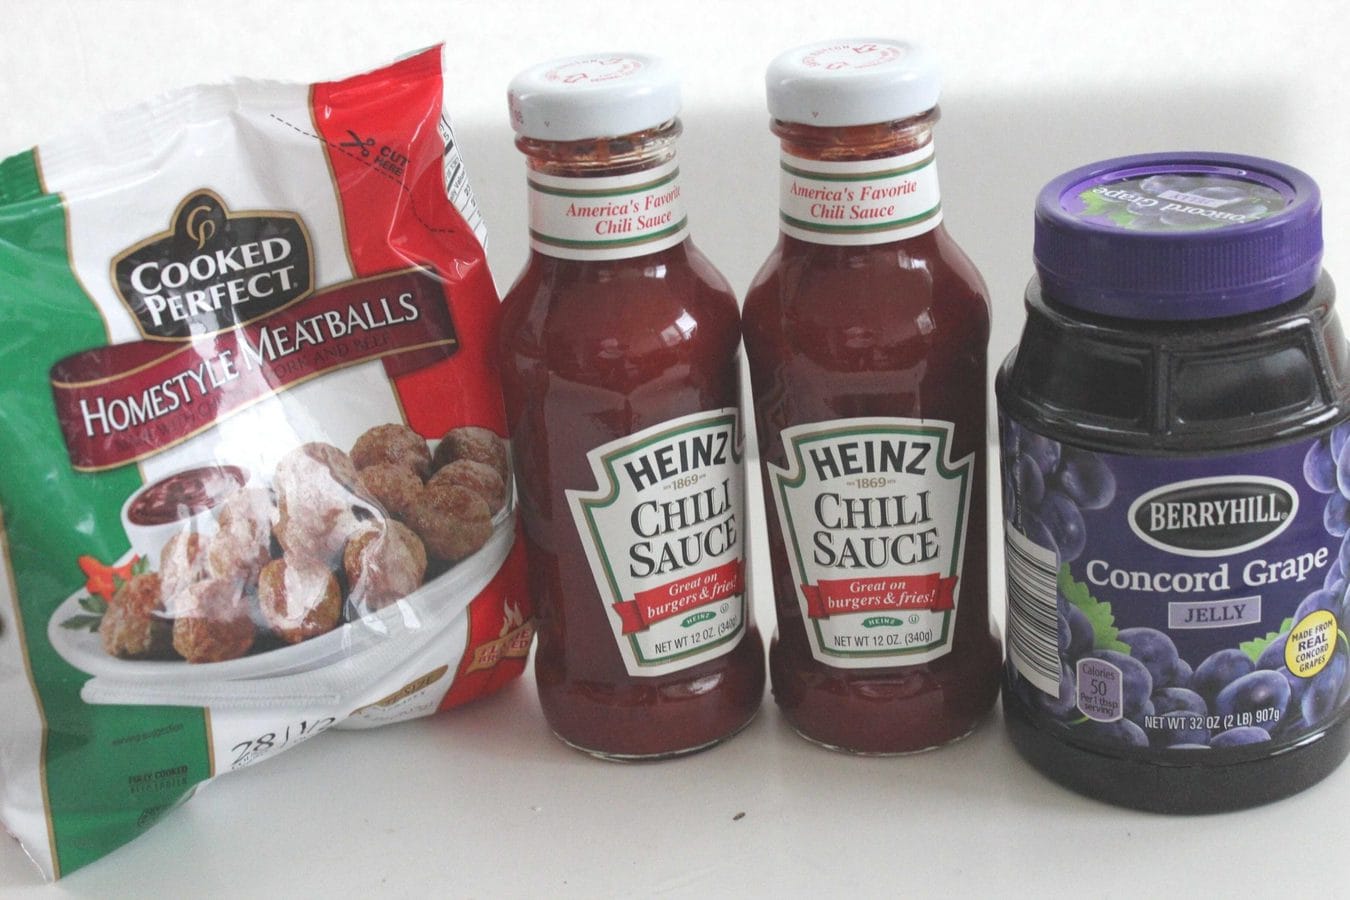 a bag of frozen meatballs, 2 bottles of Heinz chili sauce, and a jar of grape jelly.